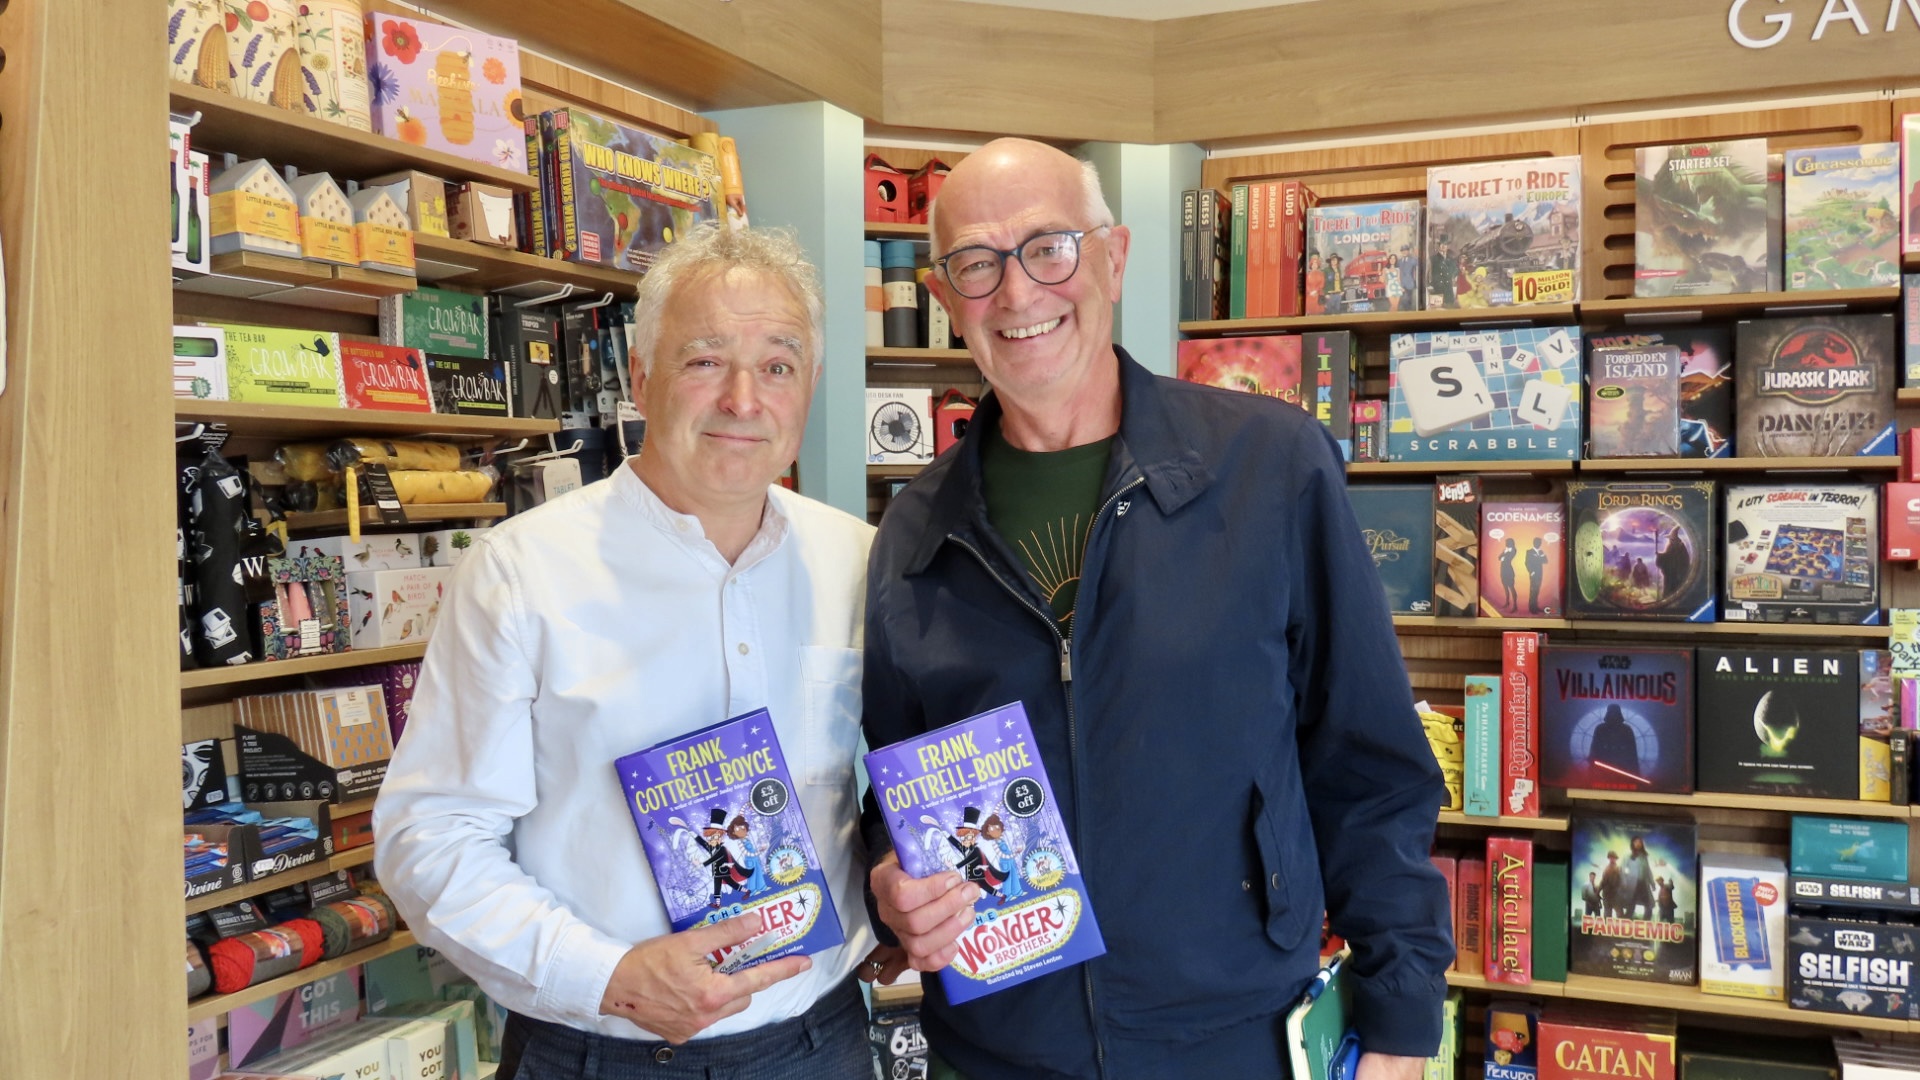 Frank-Cottrell-Boyce called into Waterstones bookshop in Southport to sign copies of his new book, The Wonder Brothers. Frank with Steve Pritchard. Photo by Andrew Brown Stand Up For Southport